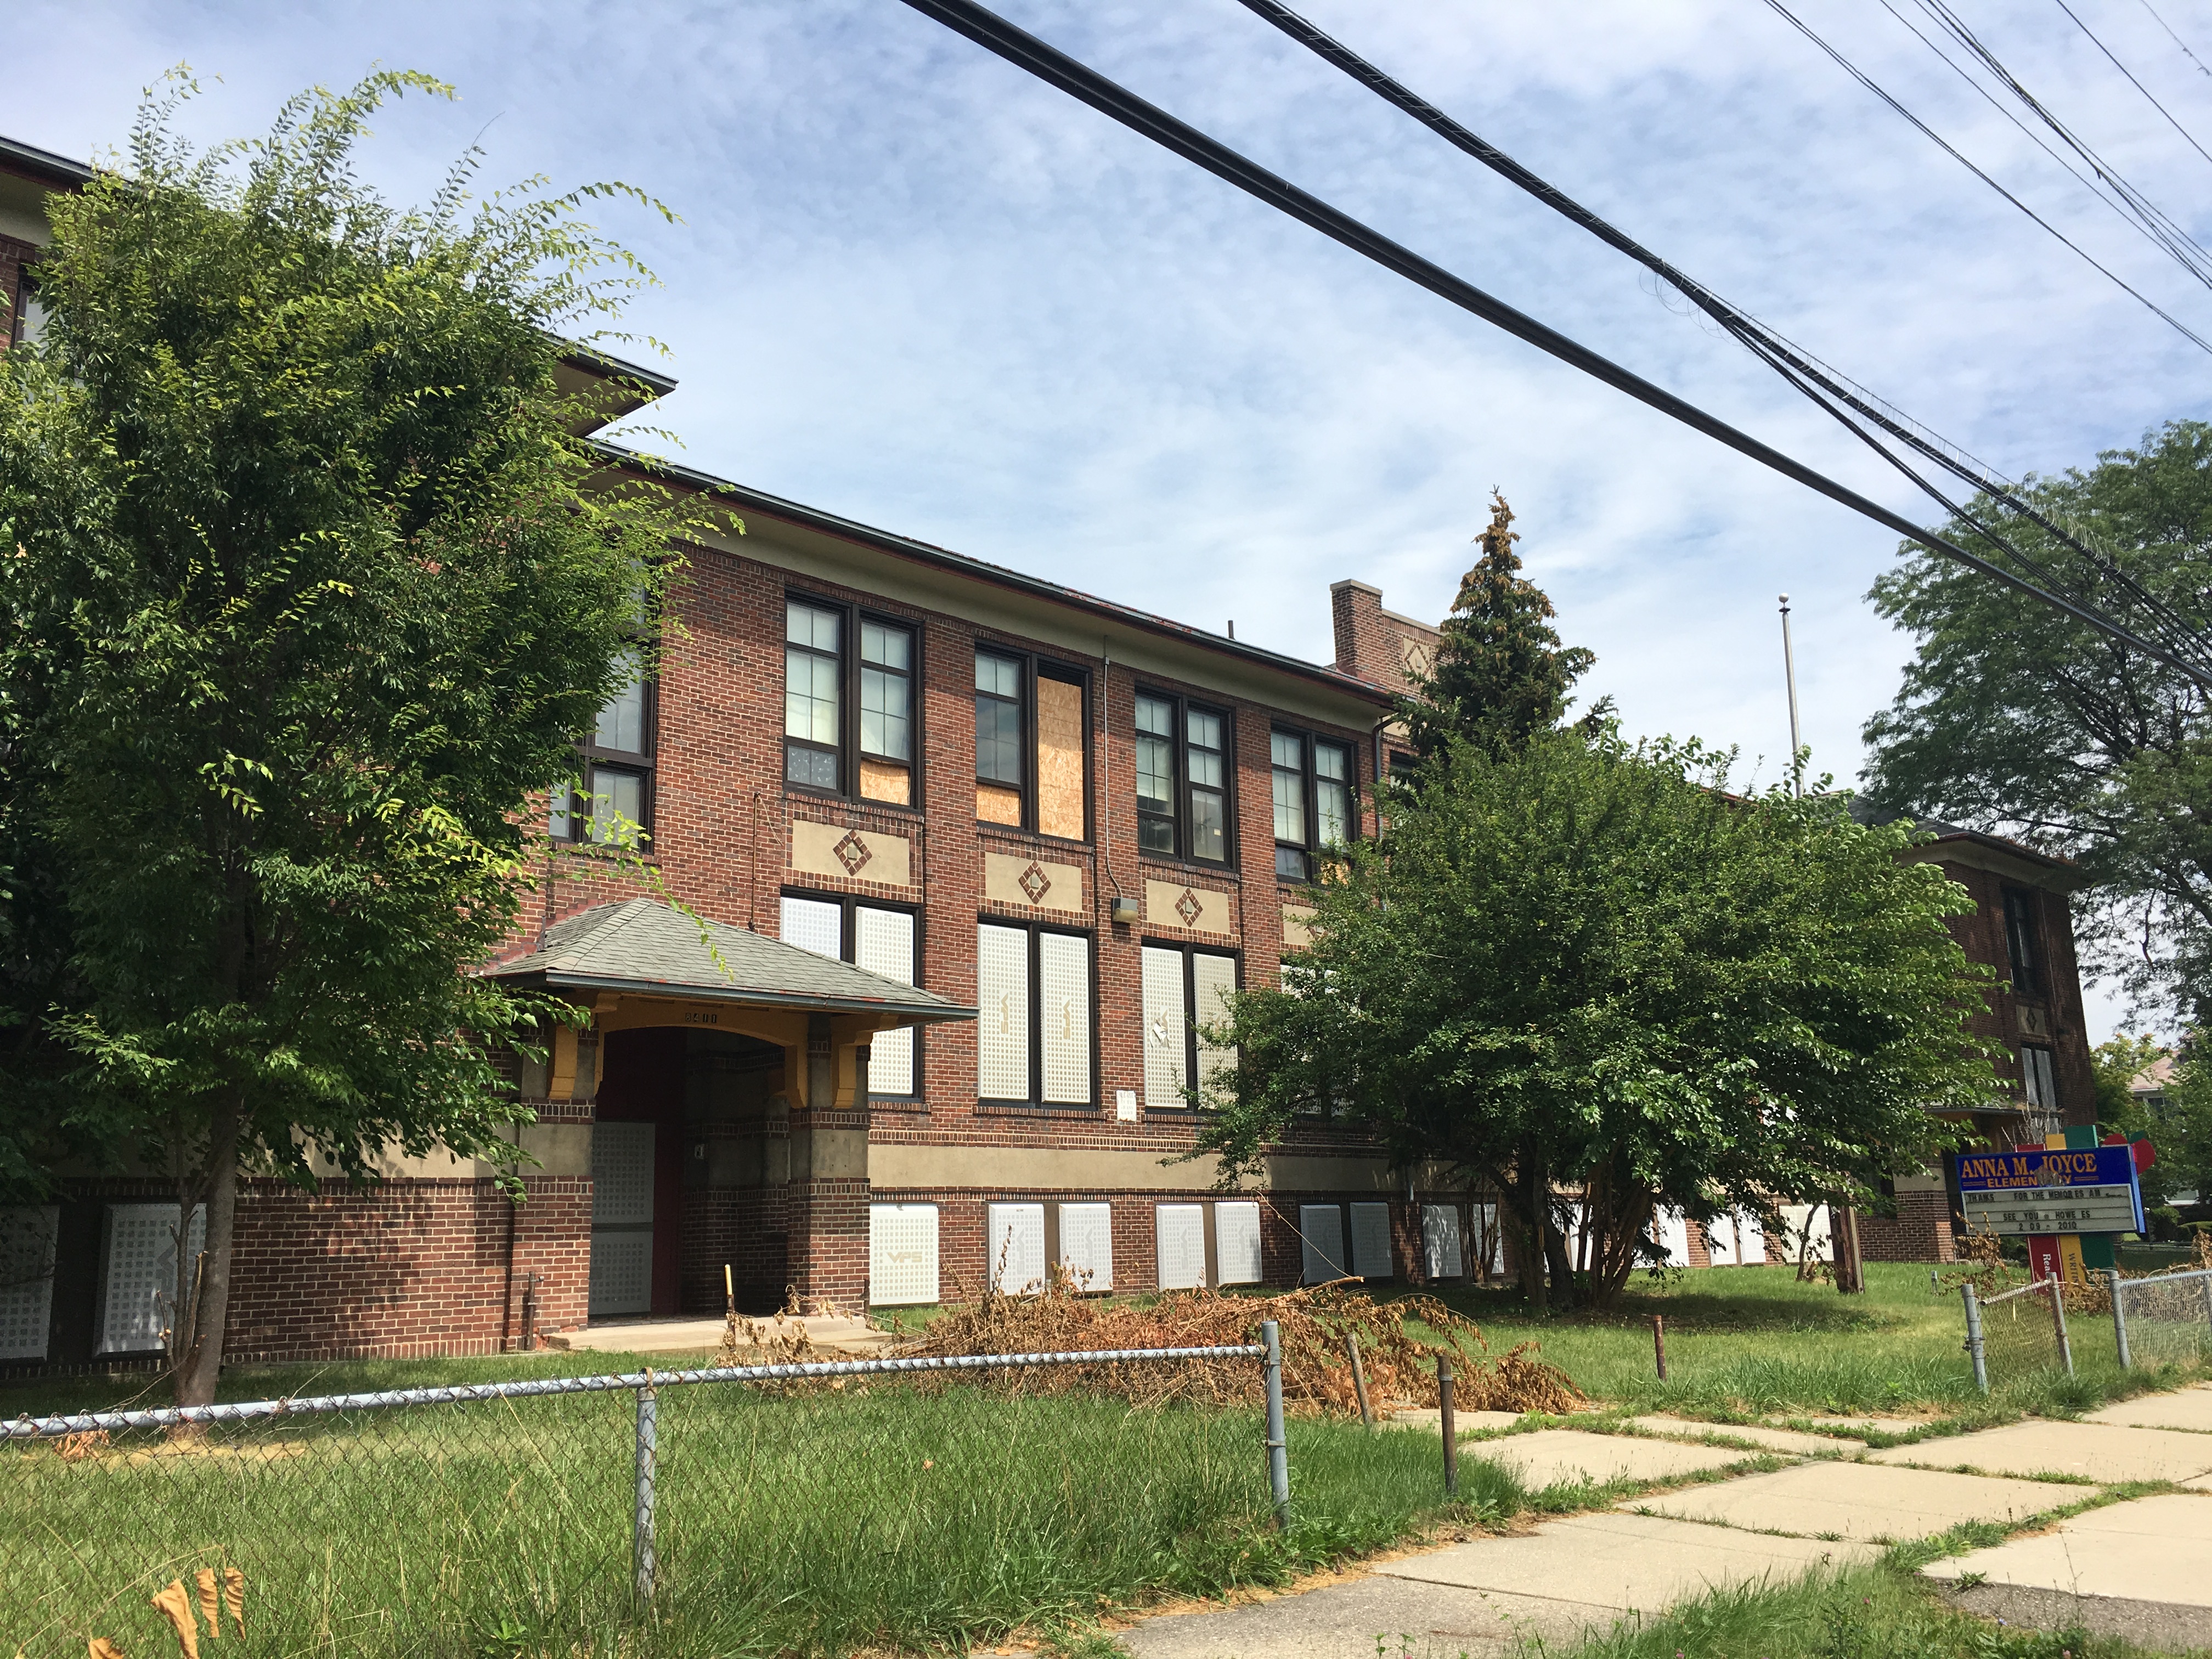 The former Anna M. Joyce Elementary School in Detroit closed in 2009.